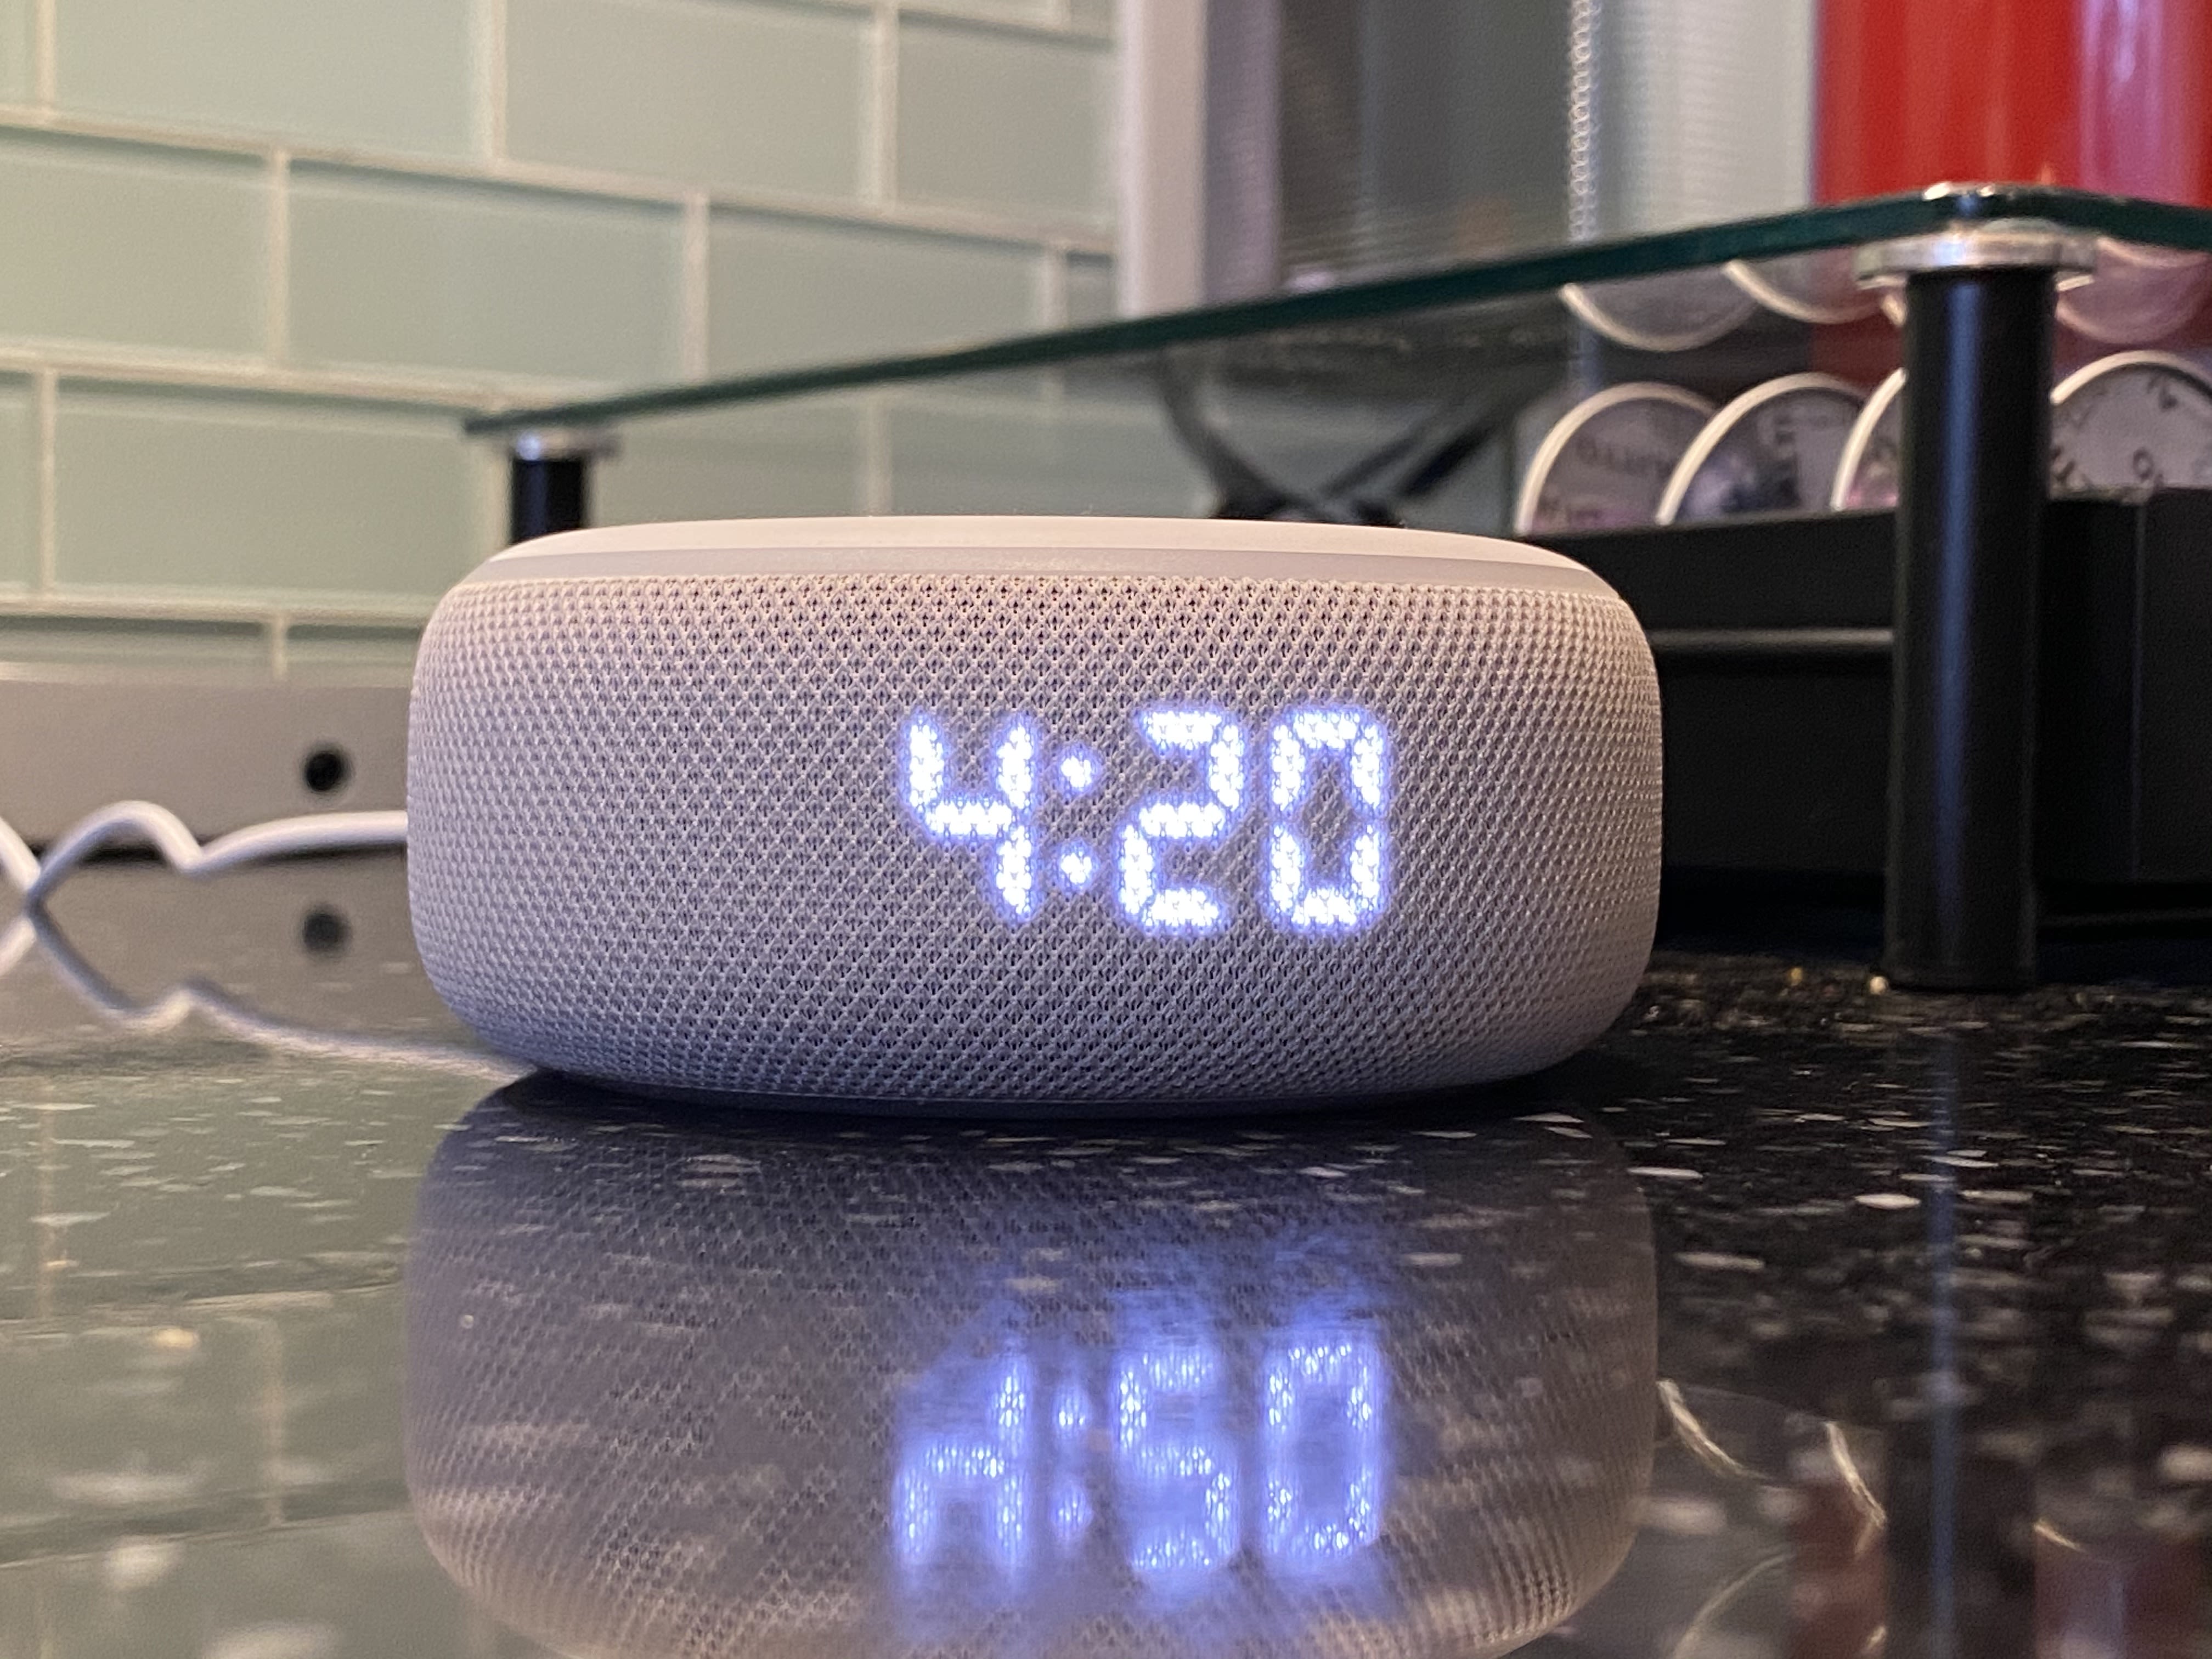 The Dot+Clock's clock was too bright for me to use as a bedside clock, so I  did a thing : r/echo